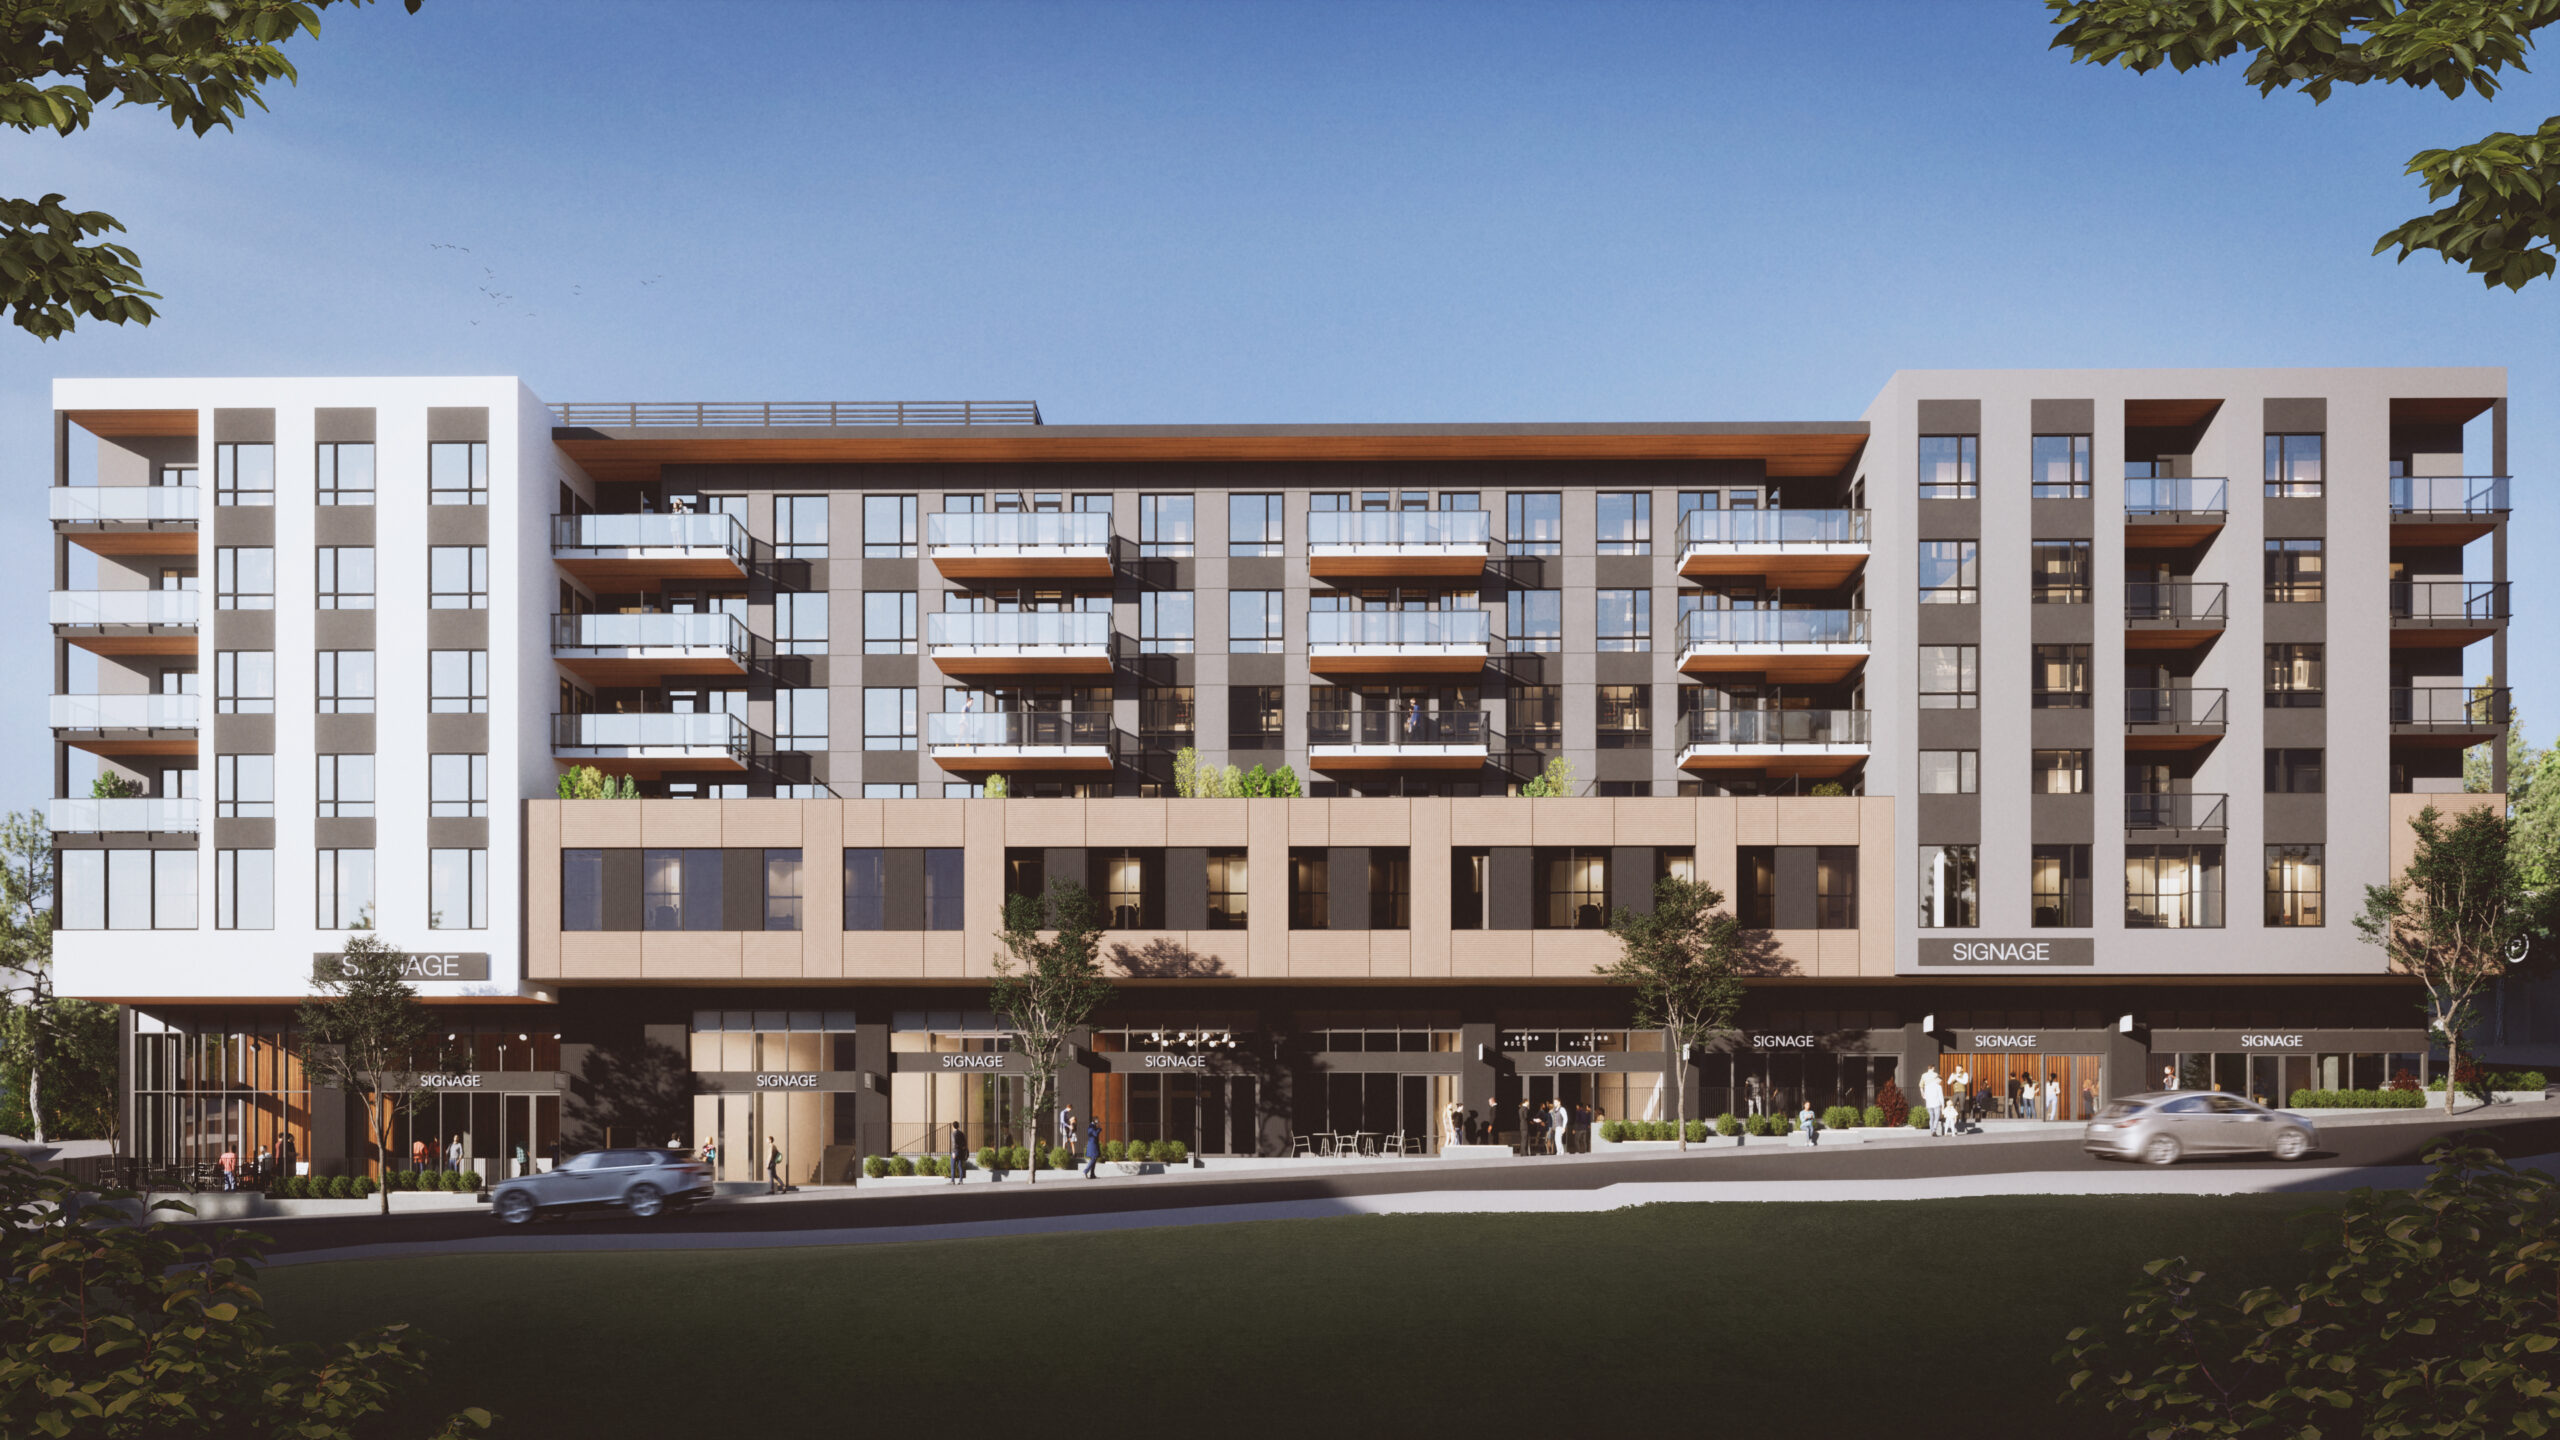 An upcoming mixed-use rental building on East Columbia Street in Sapperton, New West.